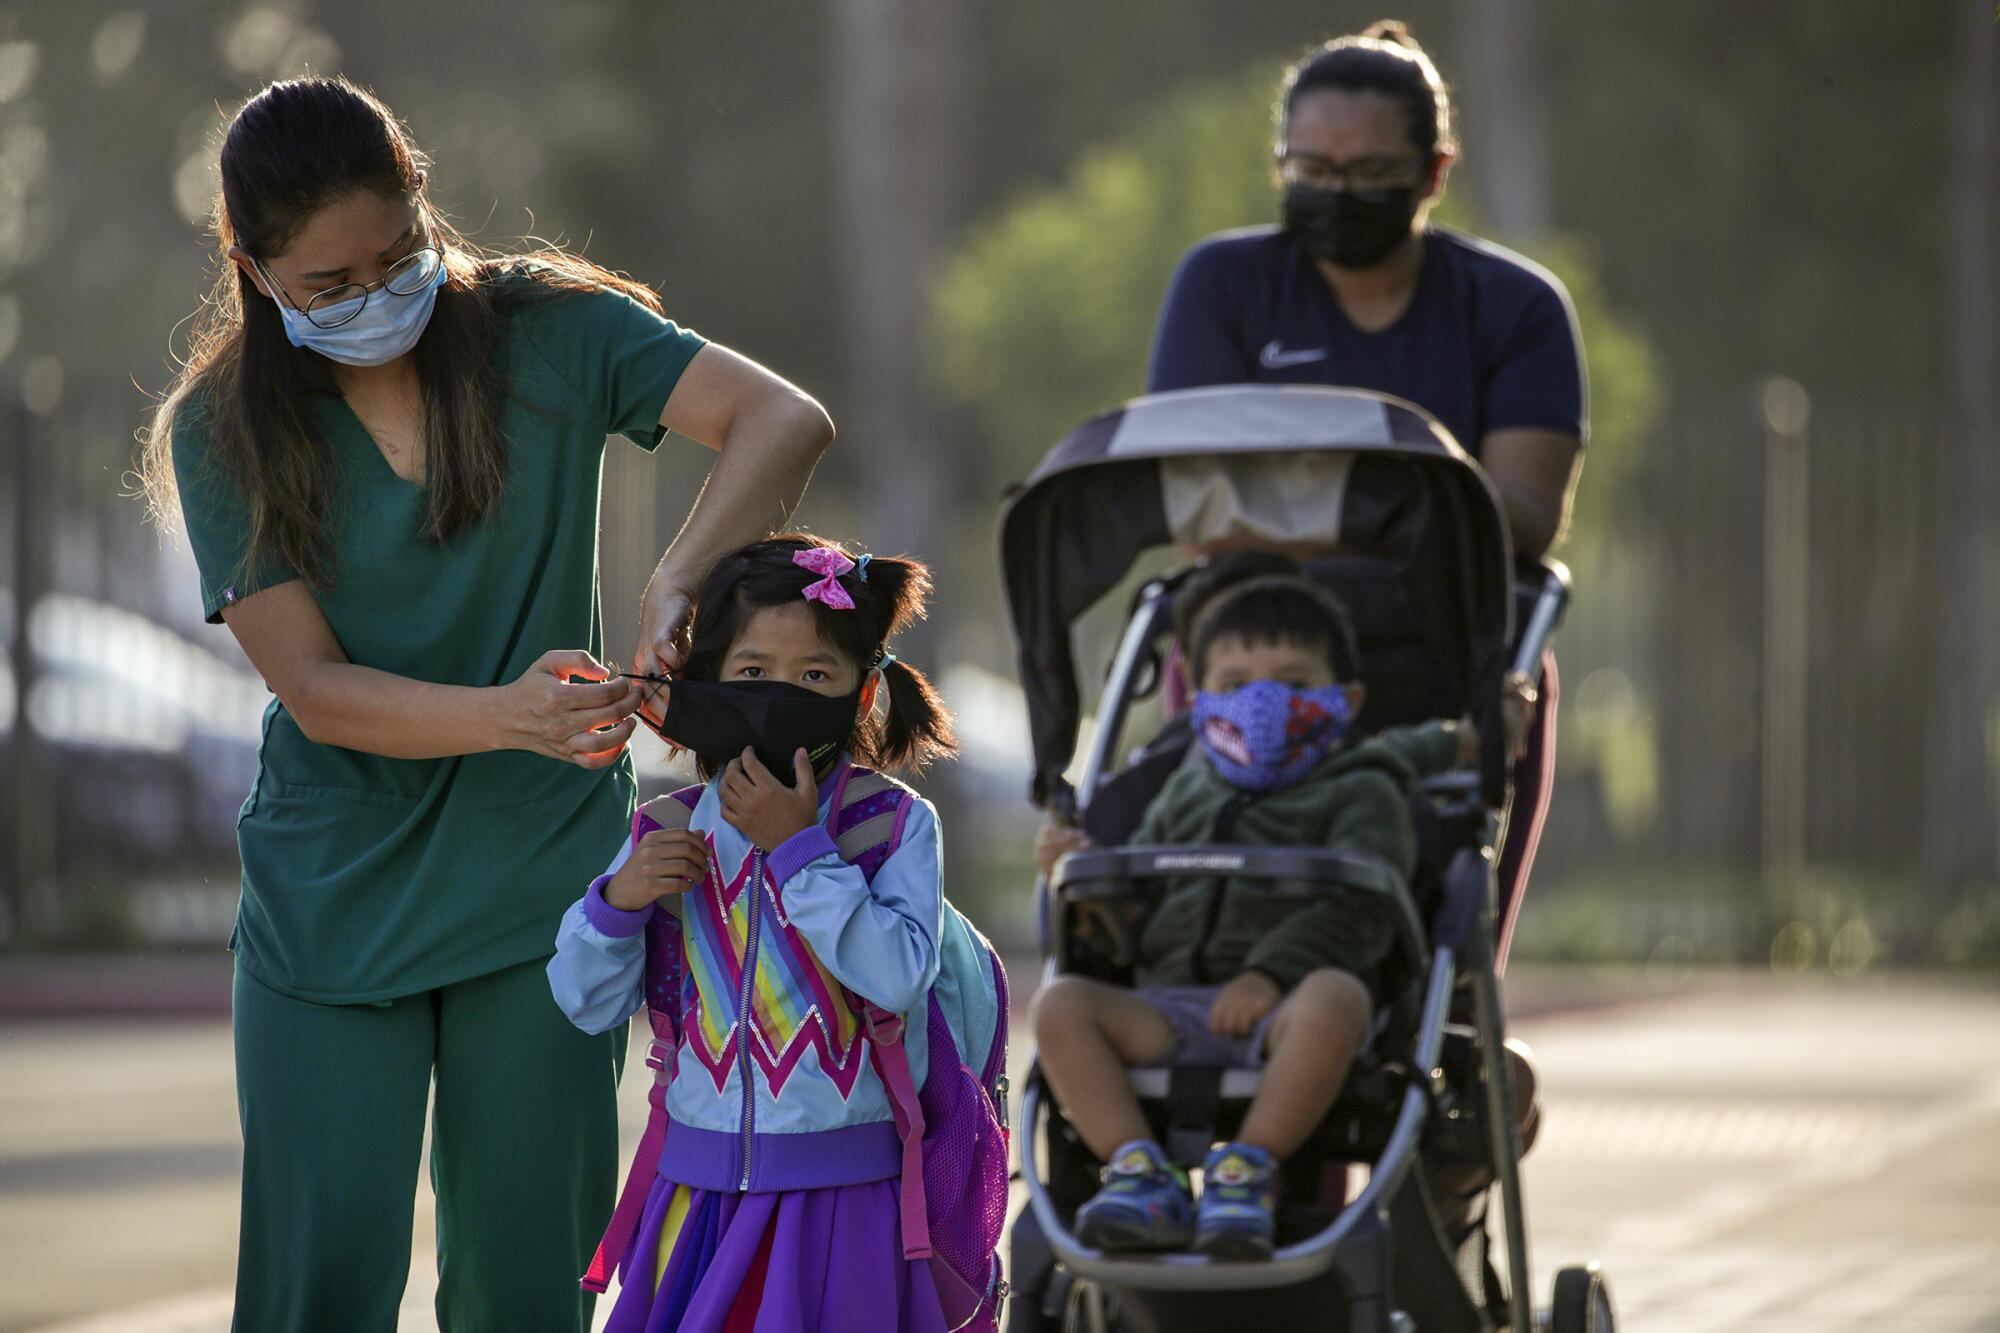 Uyen Nguyen, left, places a mask on her 6-year-old daughter, Mia, as they arrive at Theodore Roosevelt Elementary School.